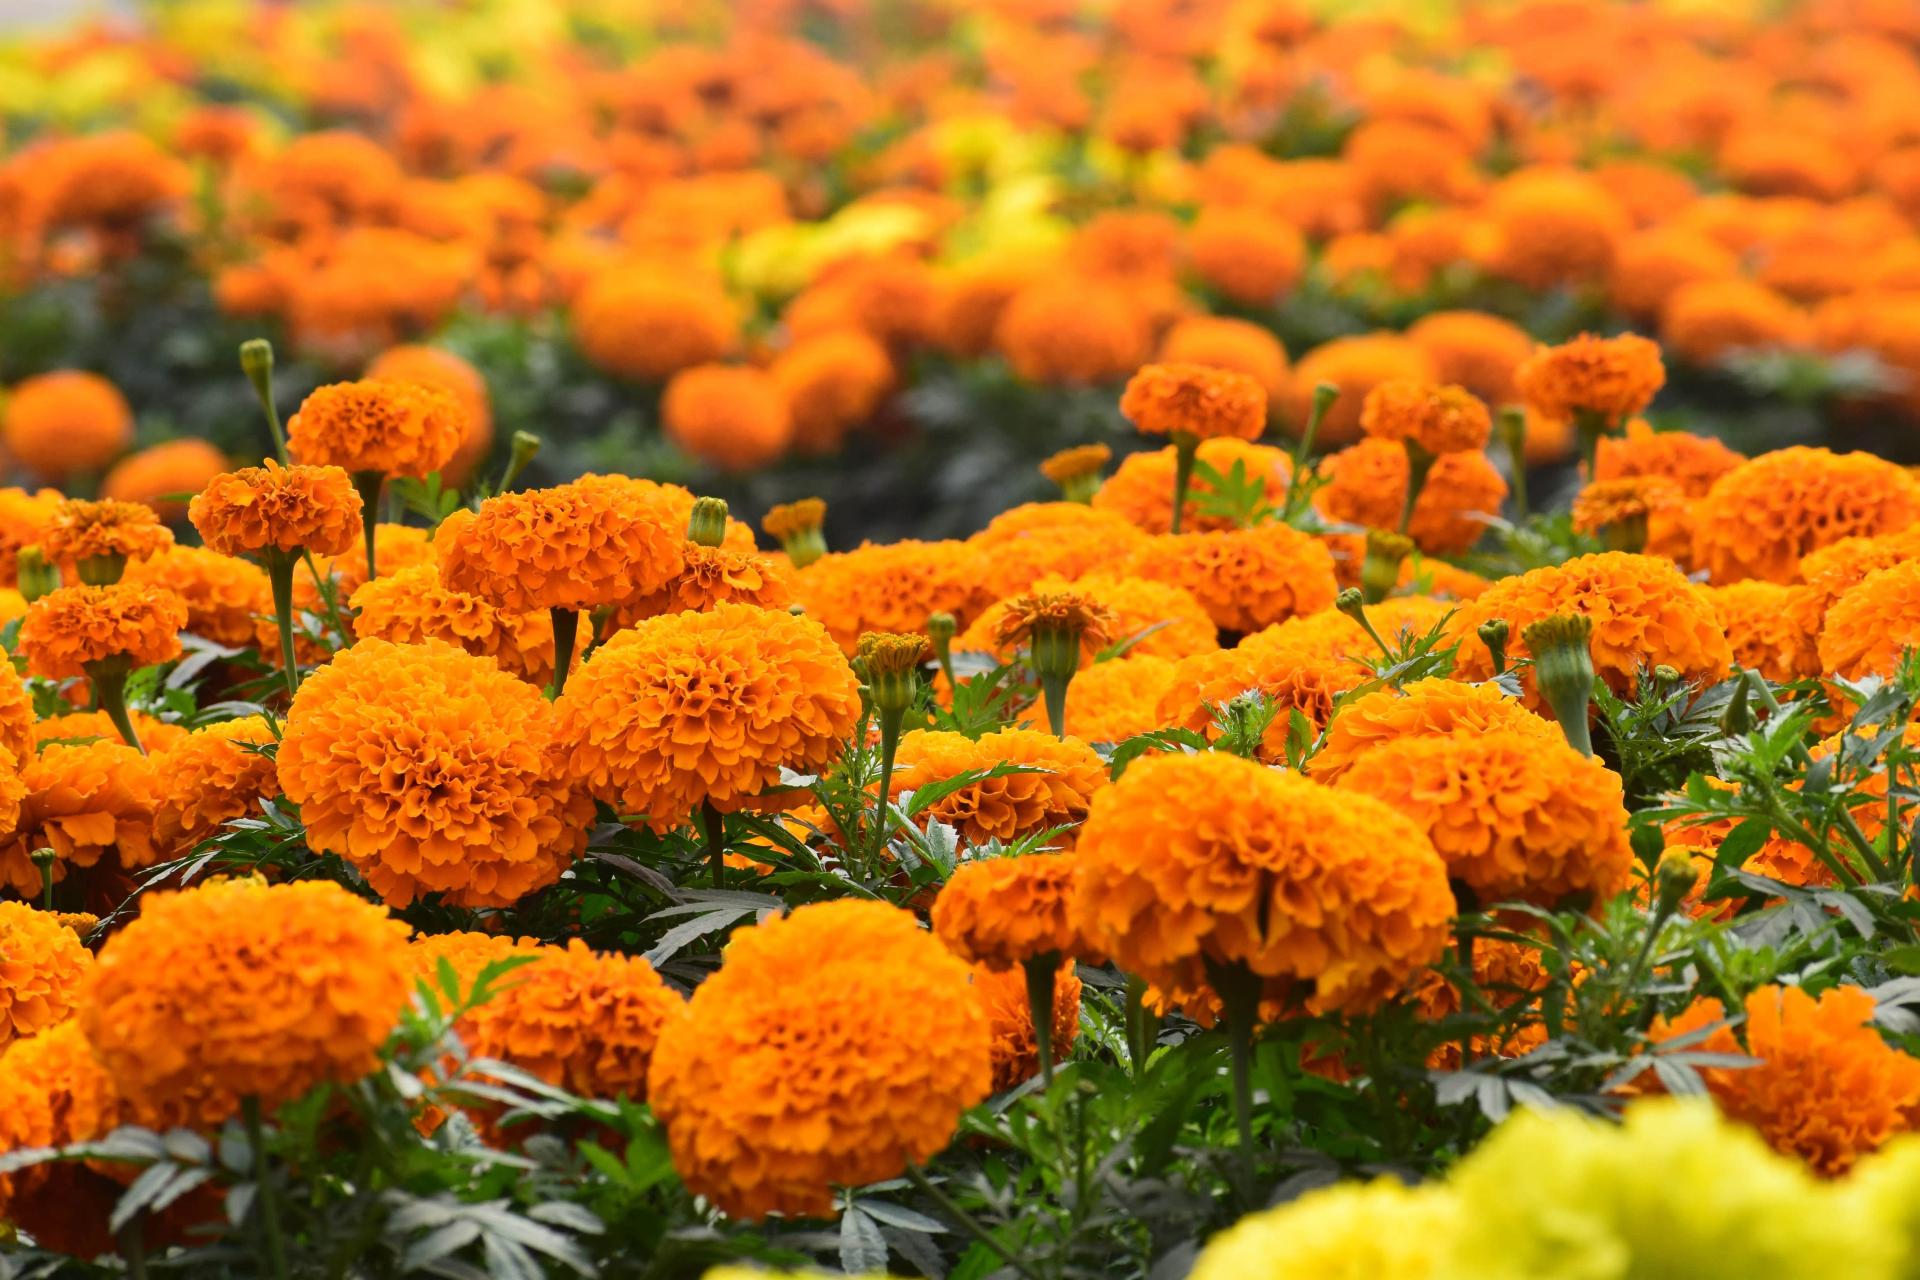 Marigolds in the Flower Bed